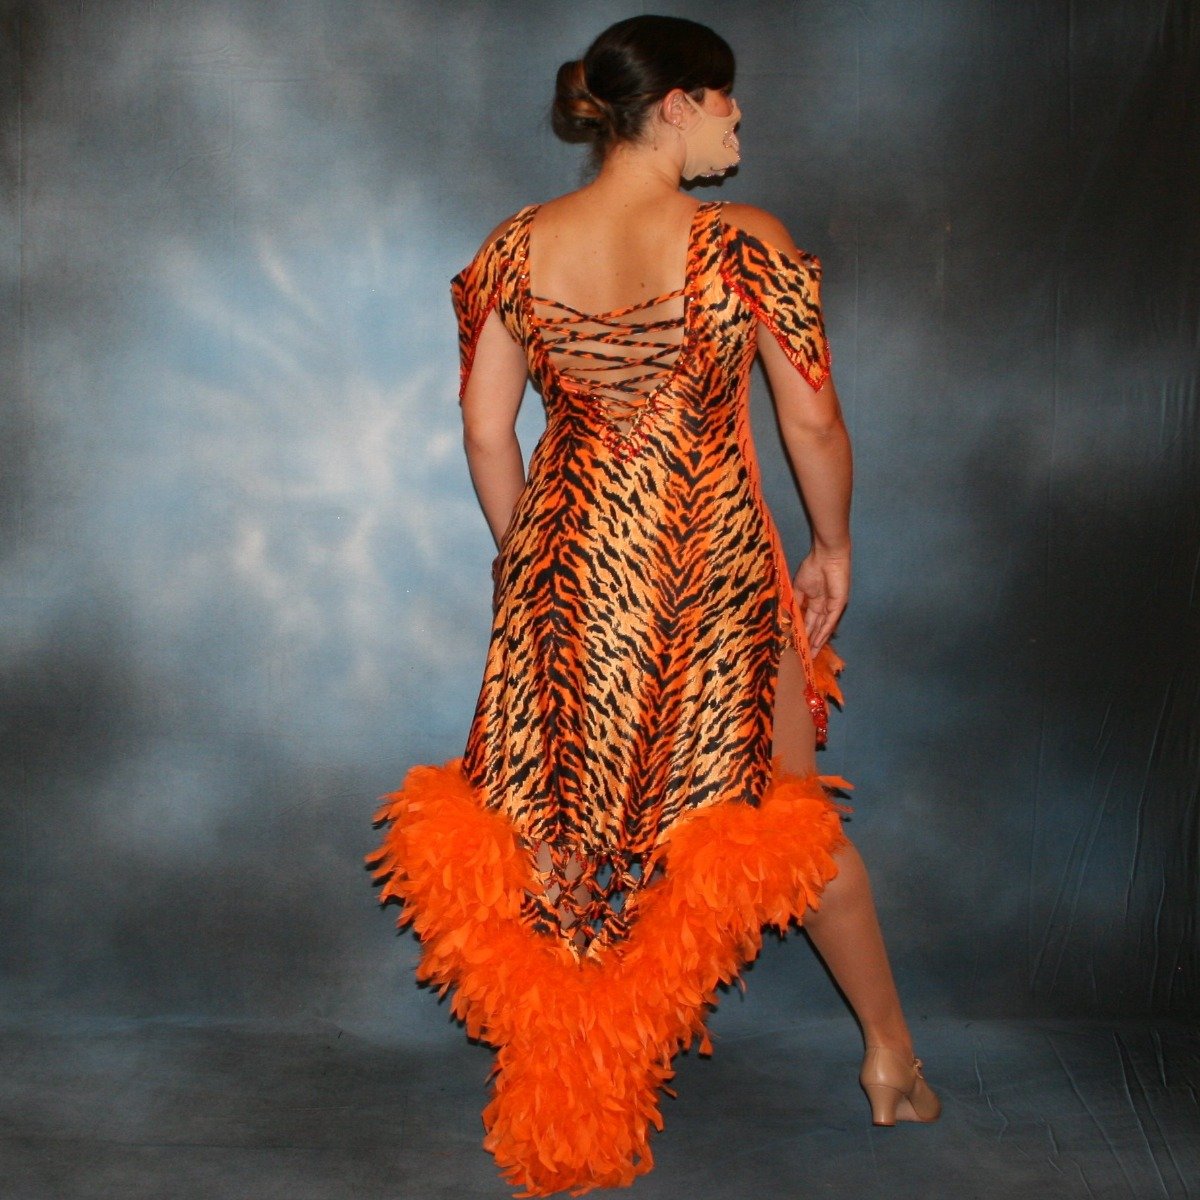 Crystal's Creations back view of Tiger print & orange Latin/rhythm dress created of tiger print lycra & luxurious orange solid slinky has color blocking, lattice work detailing in front bodice, split sides & low back, as well as intriguing longer back skirting, adorned with orange chandelle feathers, also features detailed Swarovski rhinestone work!